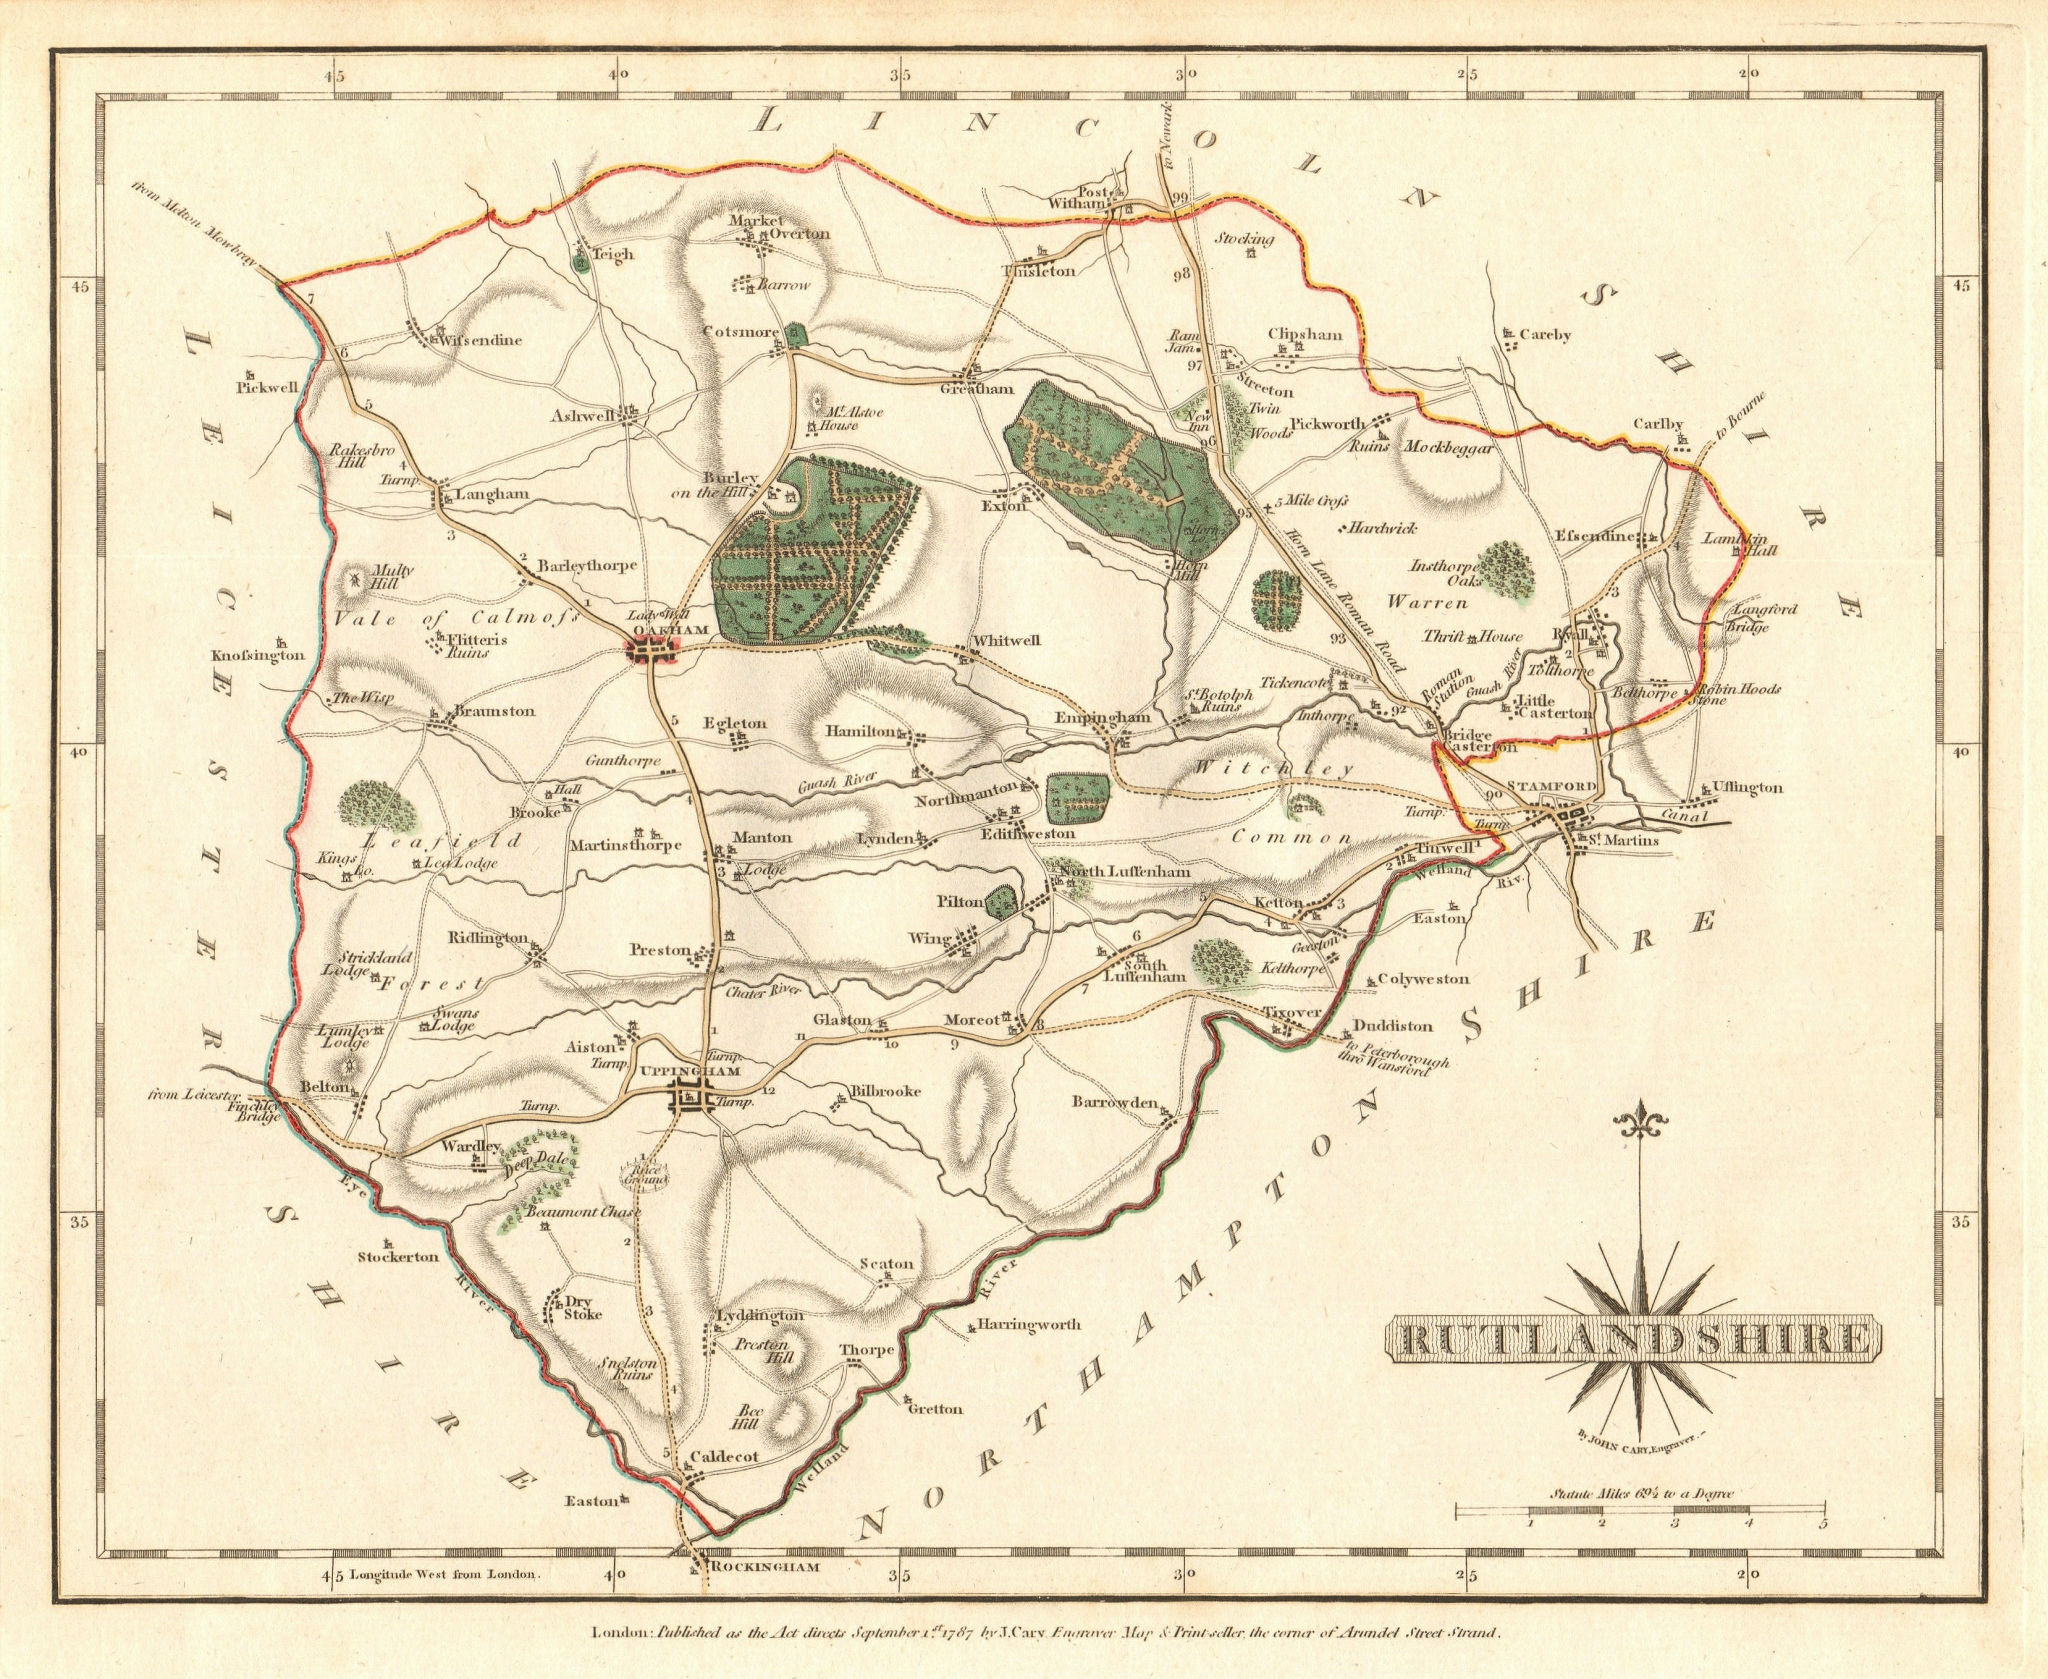 Associate Product Antique county map of RUTLANDSHIRE by JOHN CARY. Original outline colour 1787